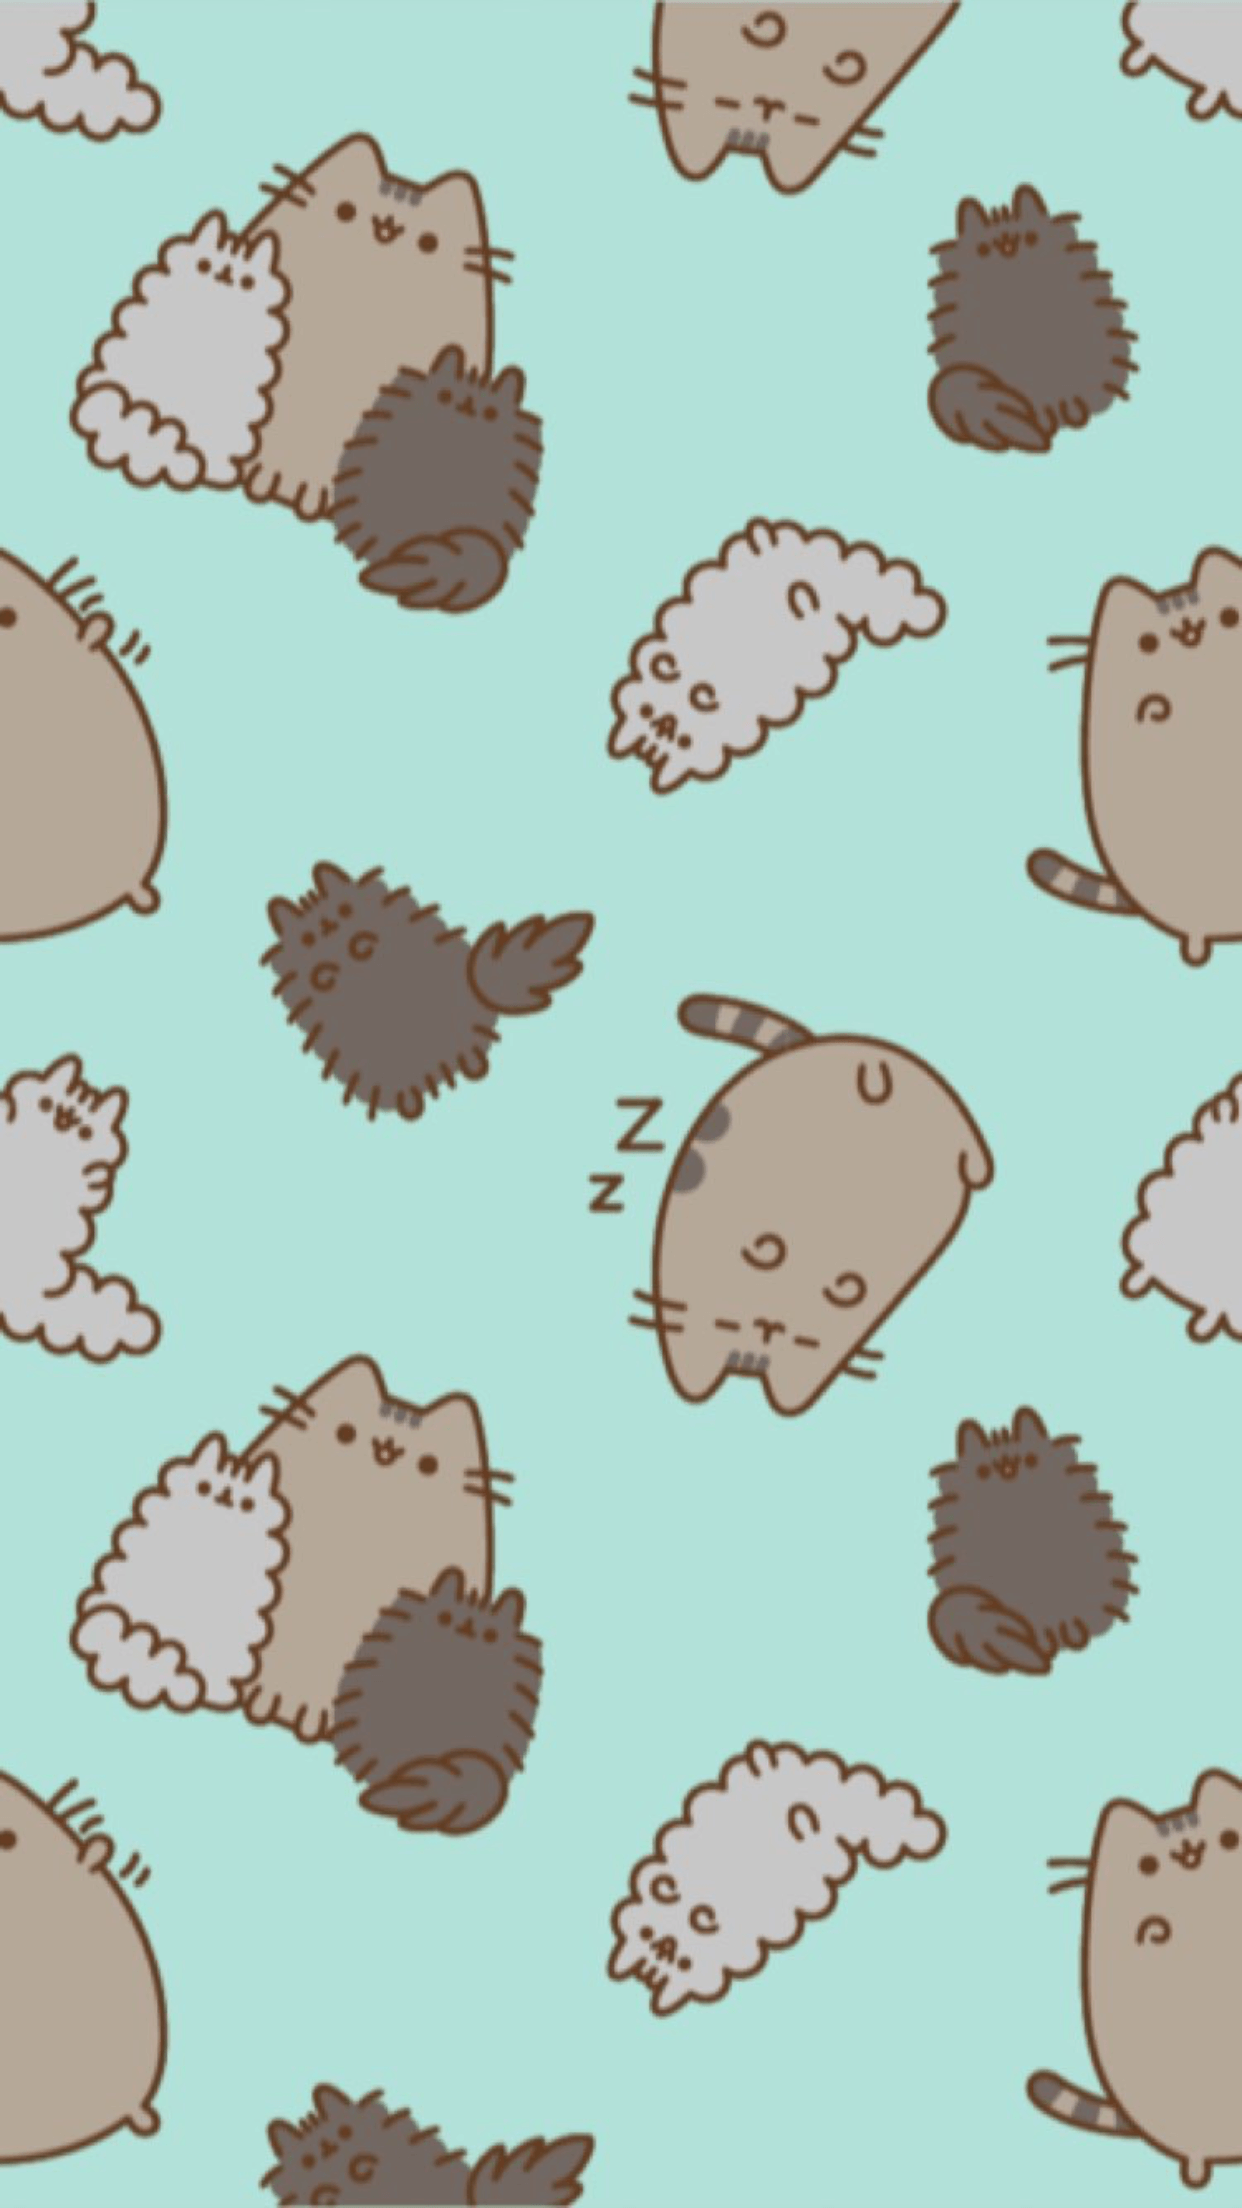 Pusheen And Stormy Wallpapers - Wallpaper Cave